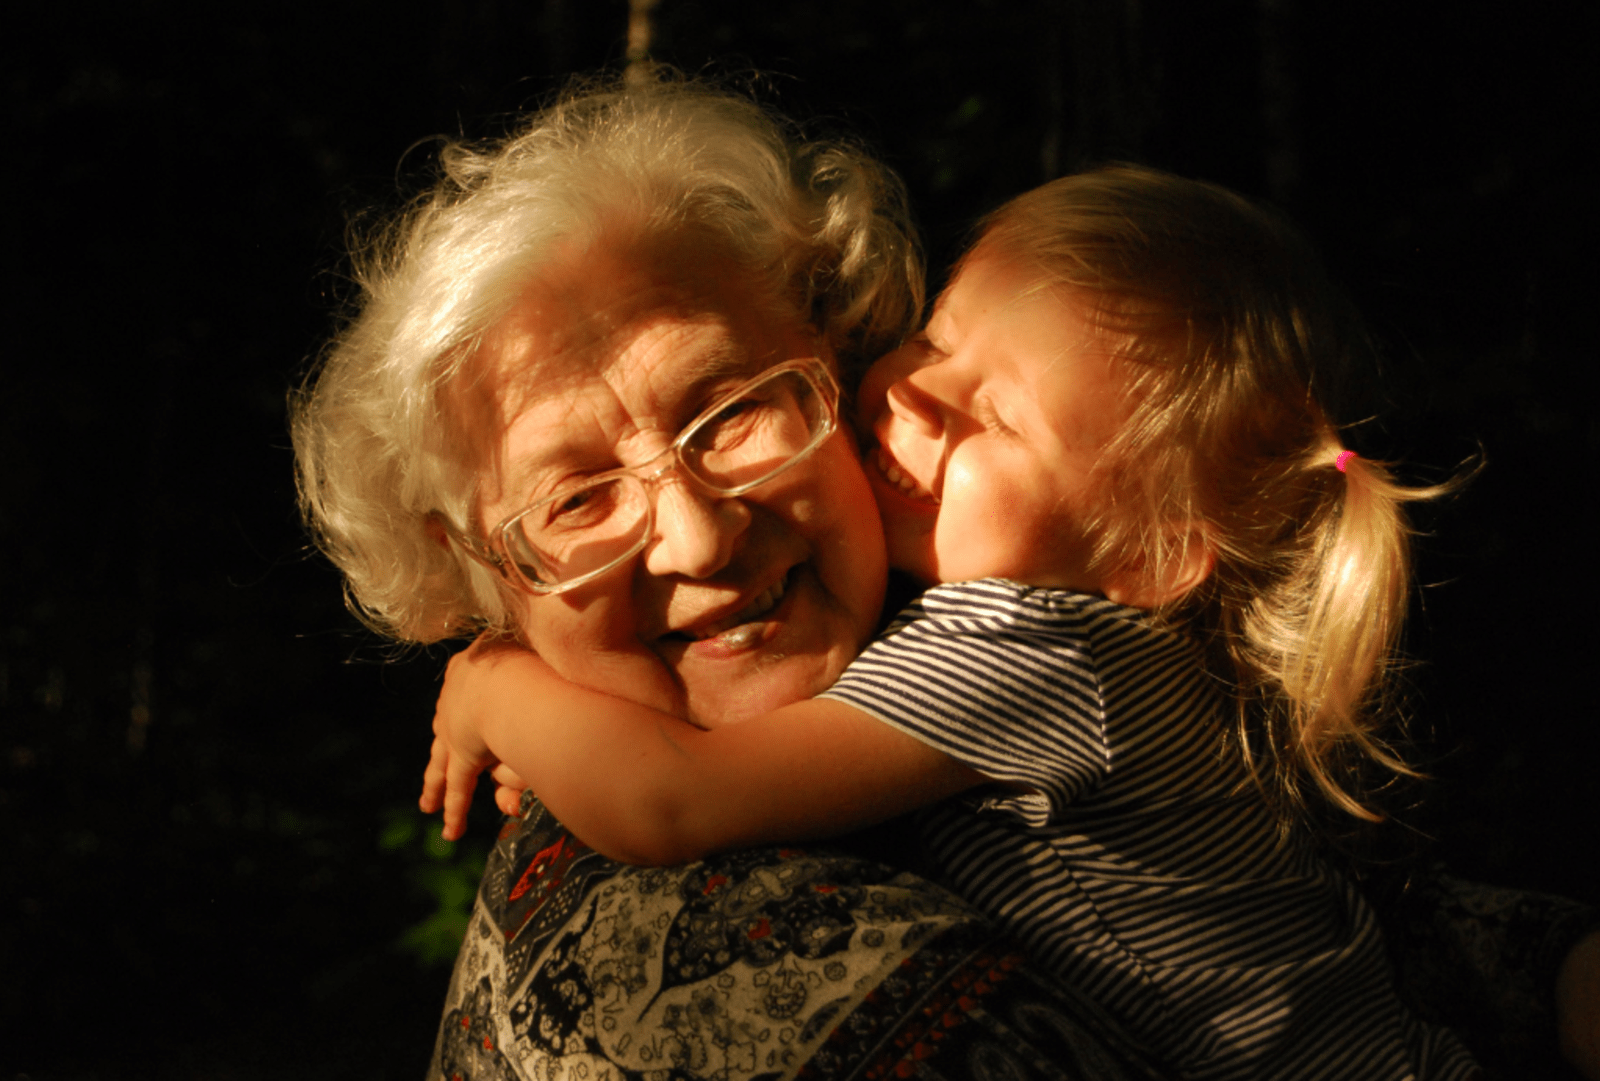 A young girl cuddles an old woman